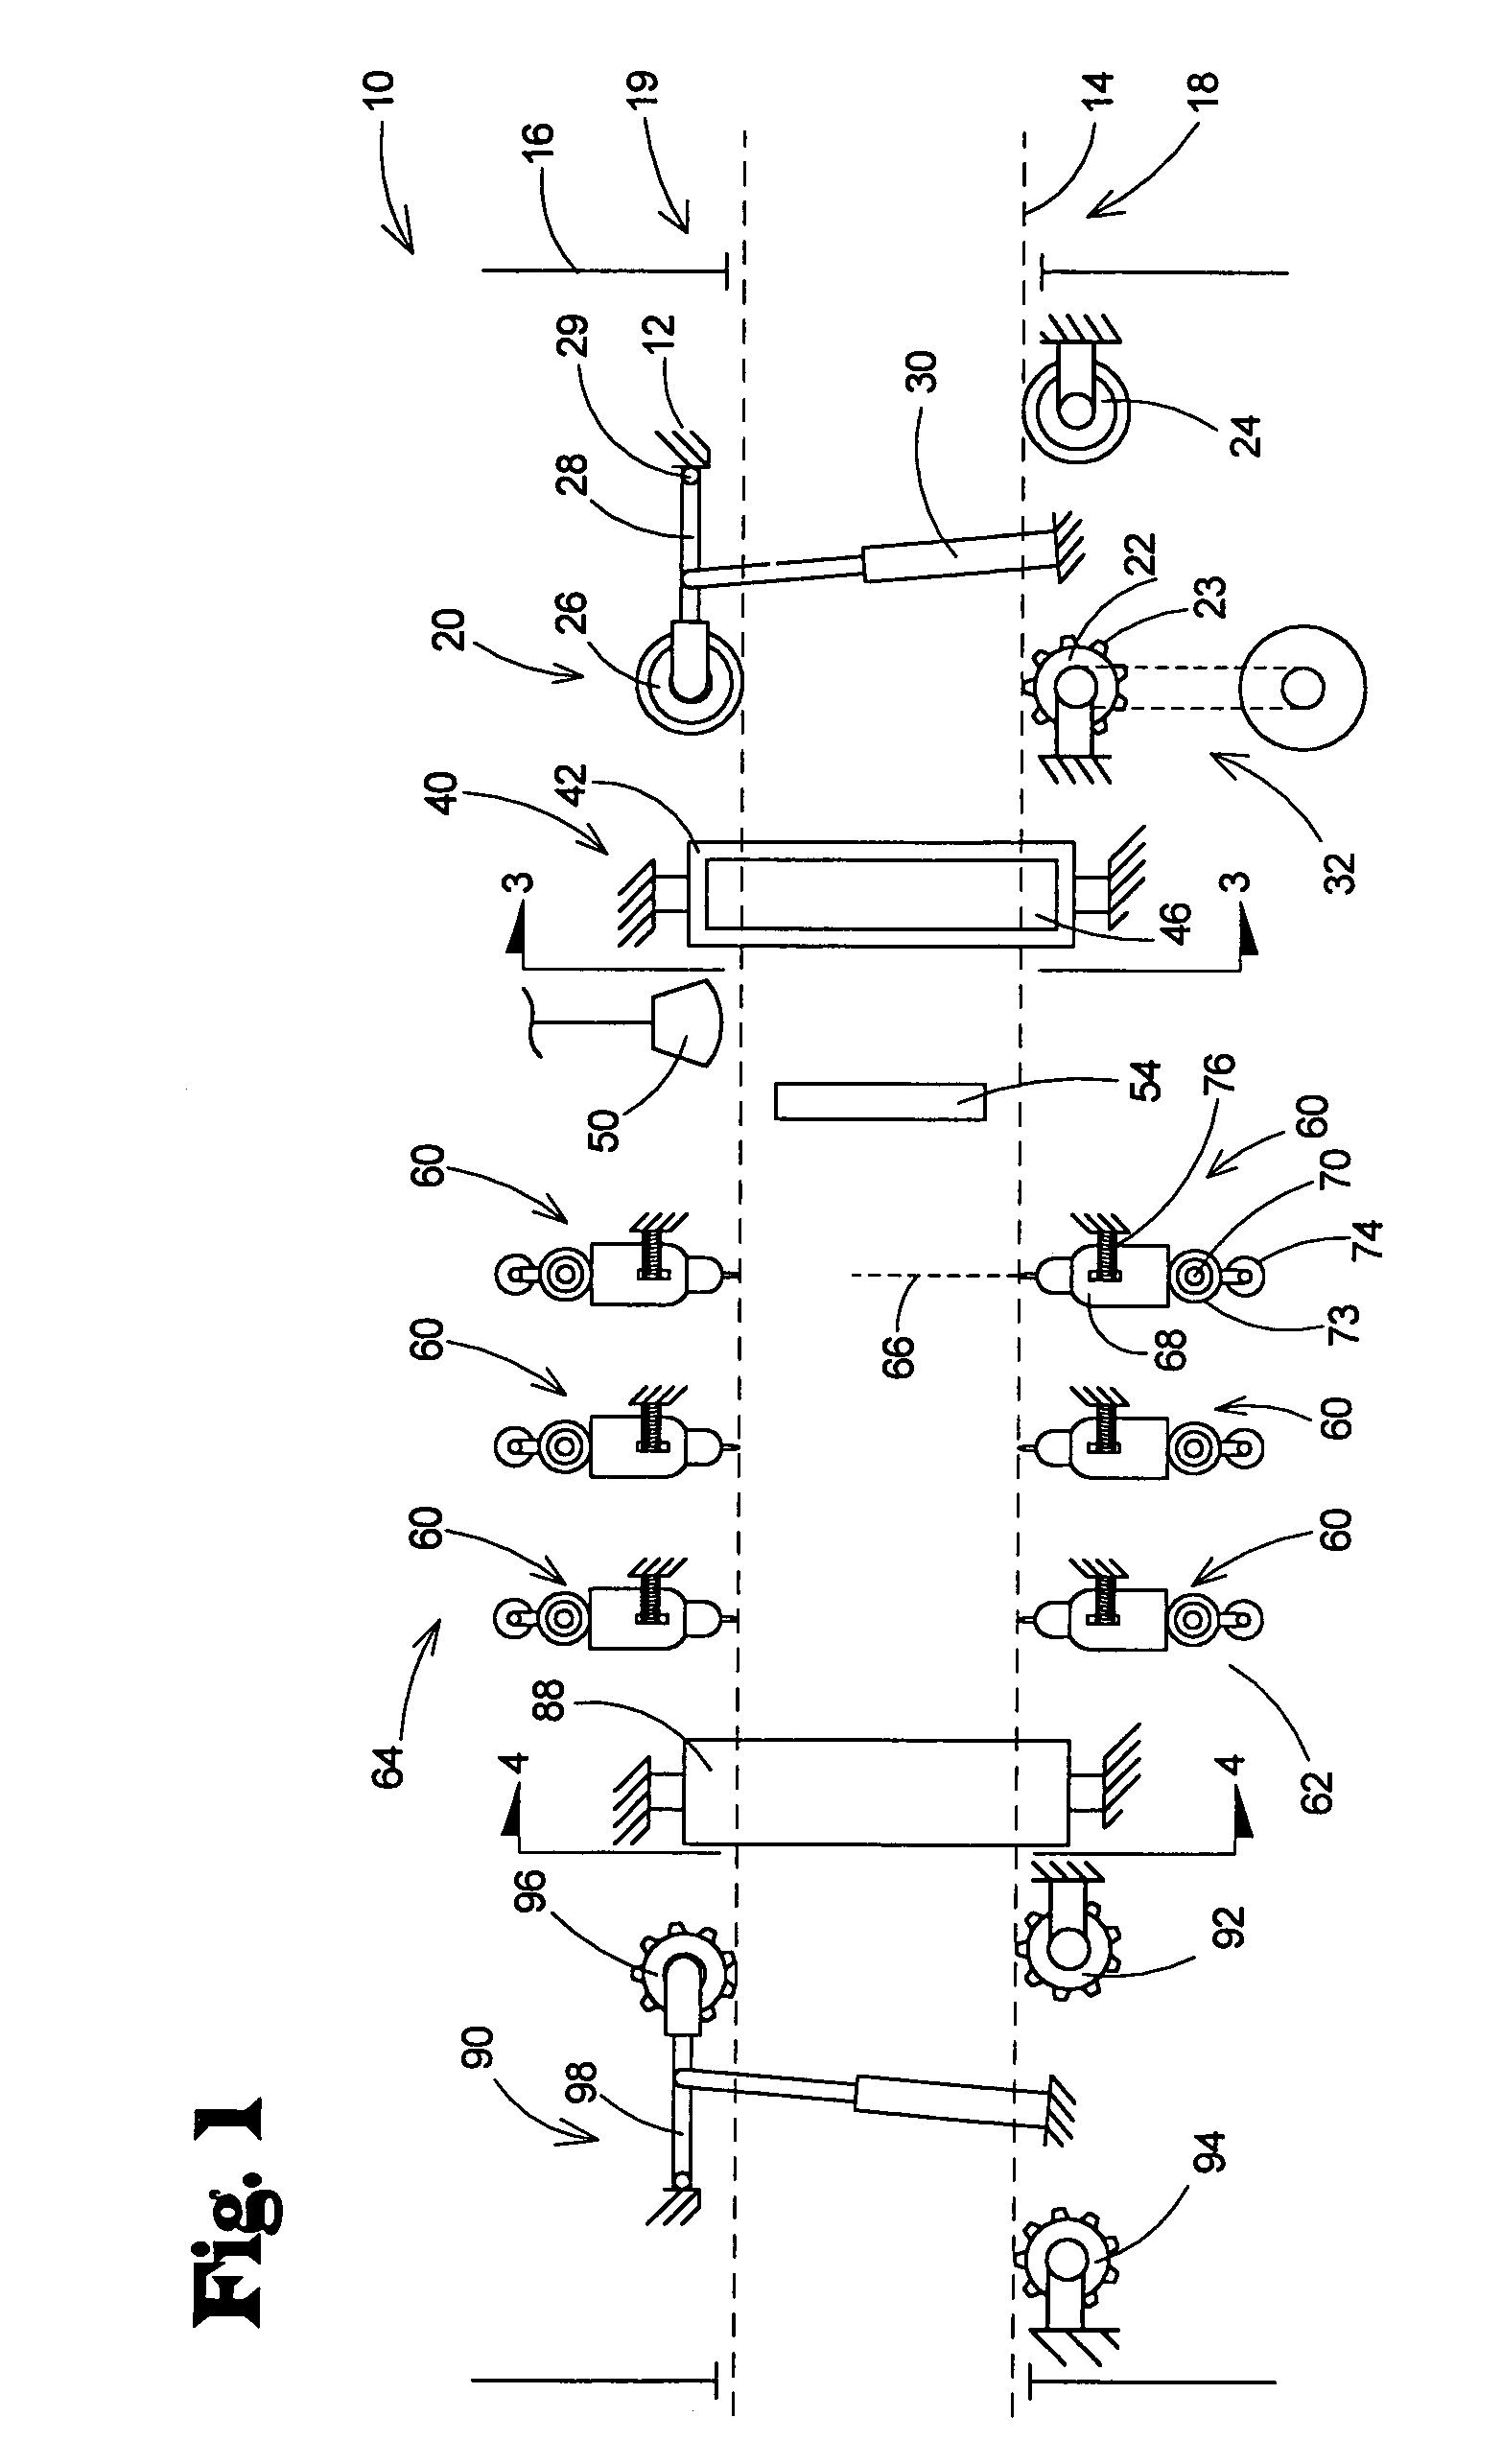 Automated multiple point fastener driving system